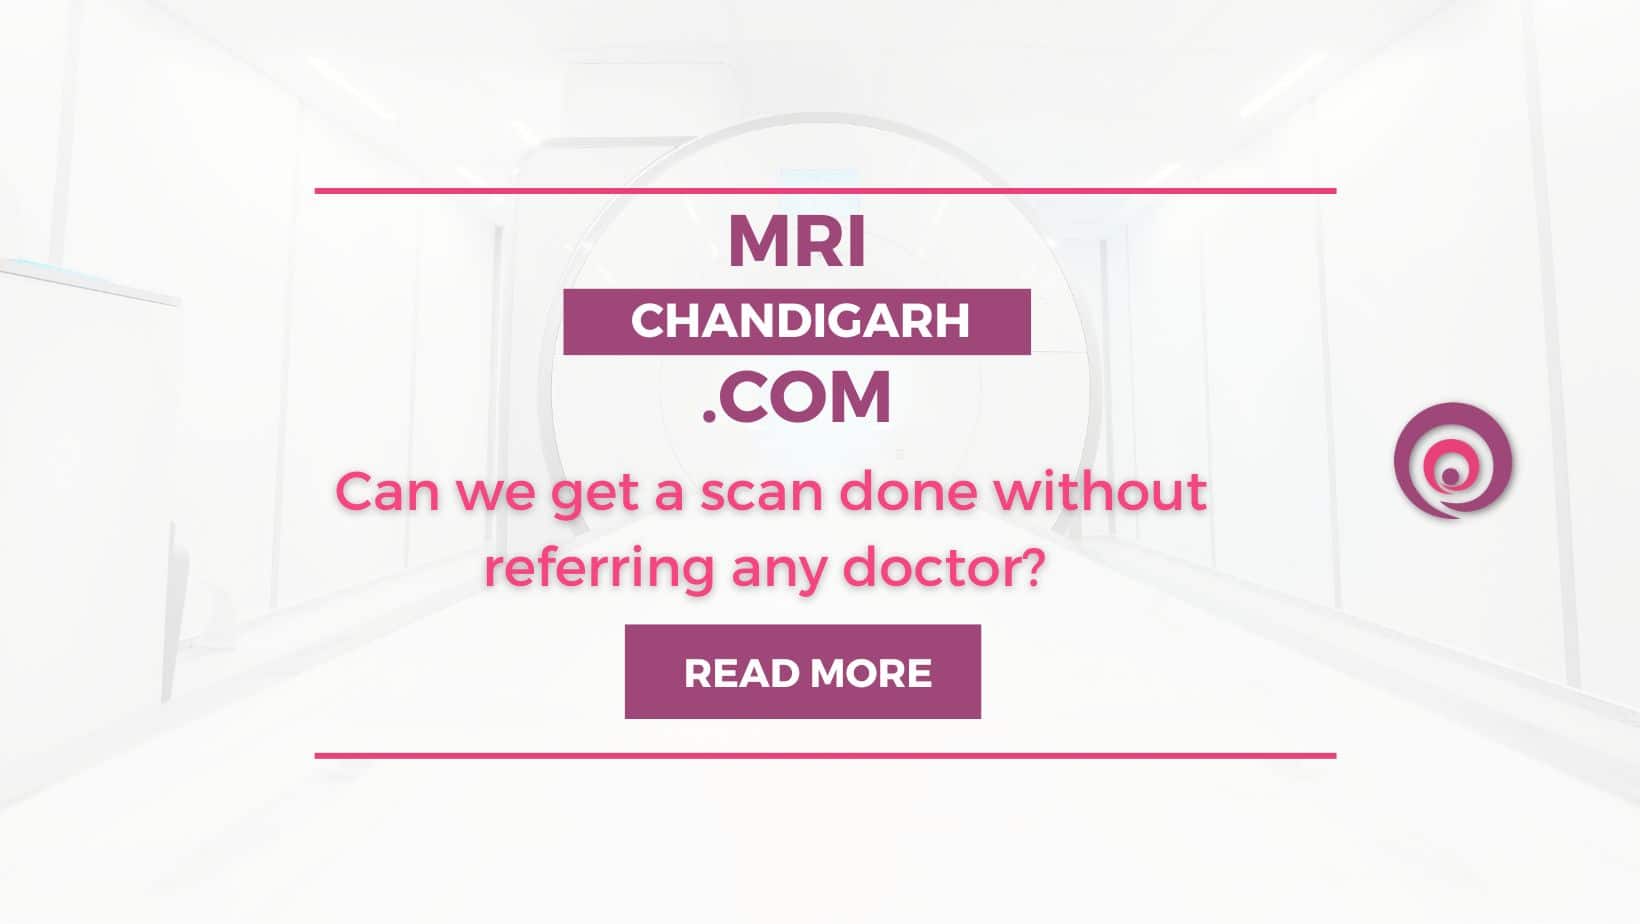 Can we get a scan done without referring any doctor?